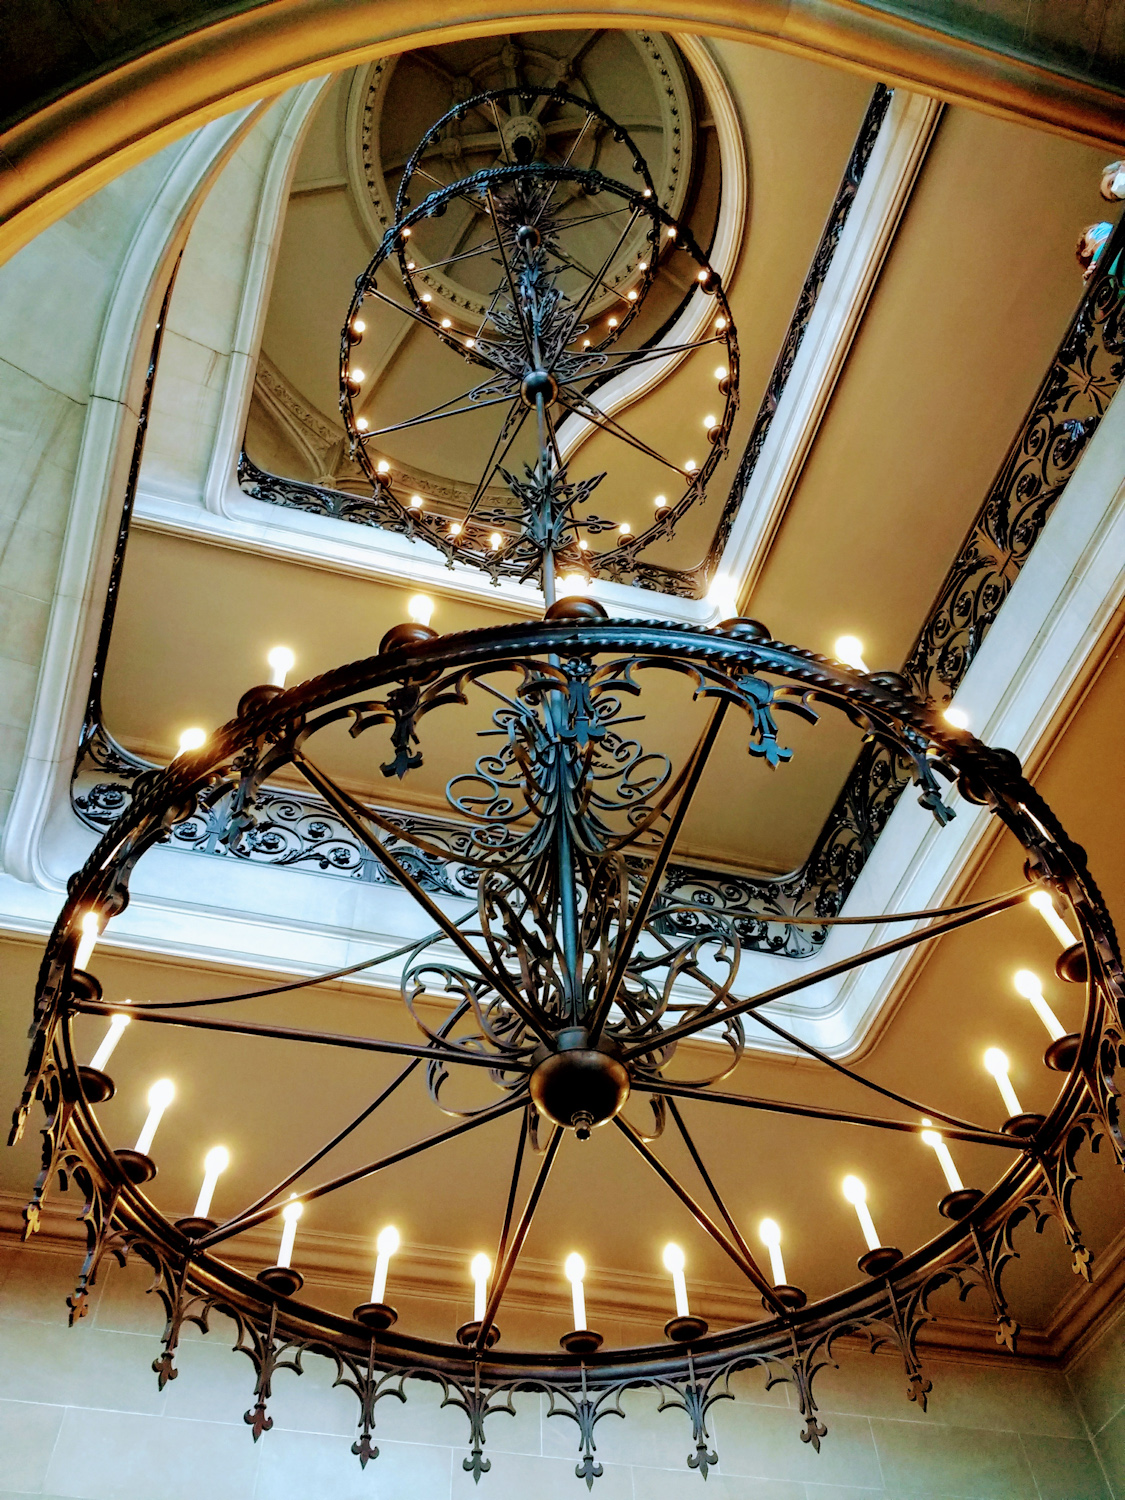 Chandelier in Grand Staircase